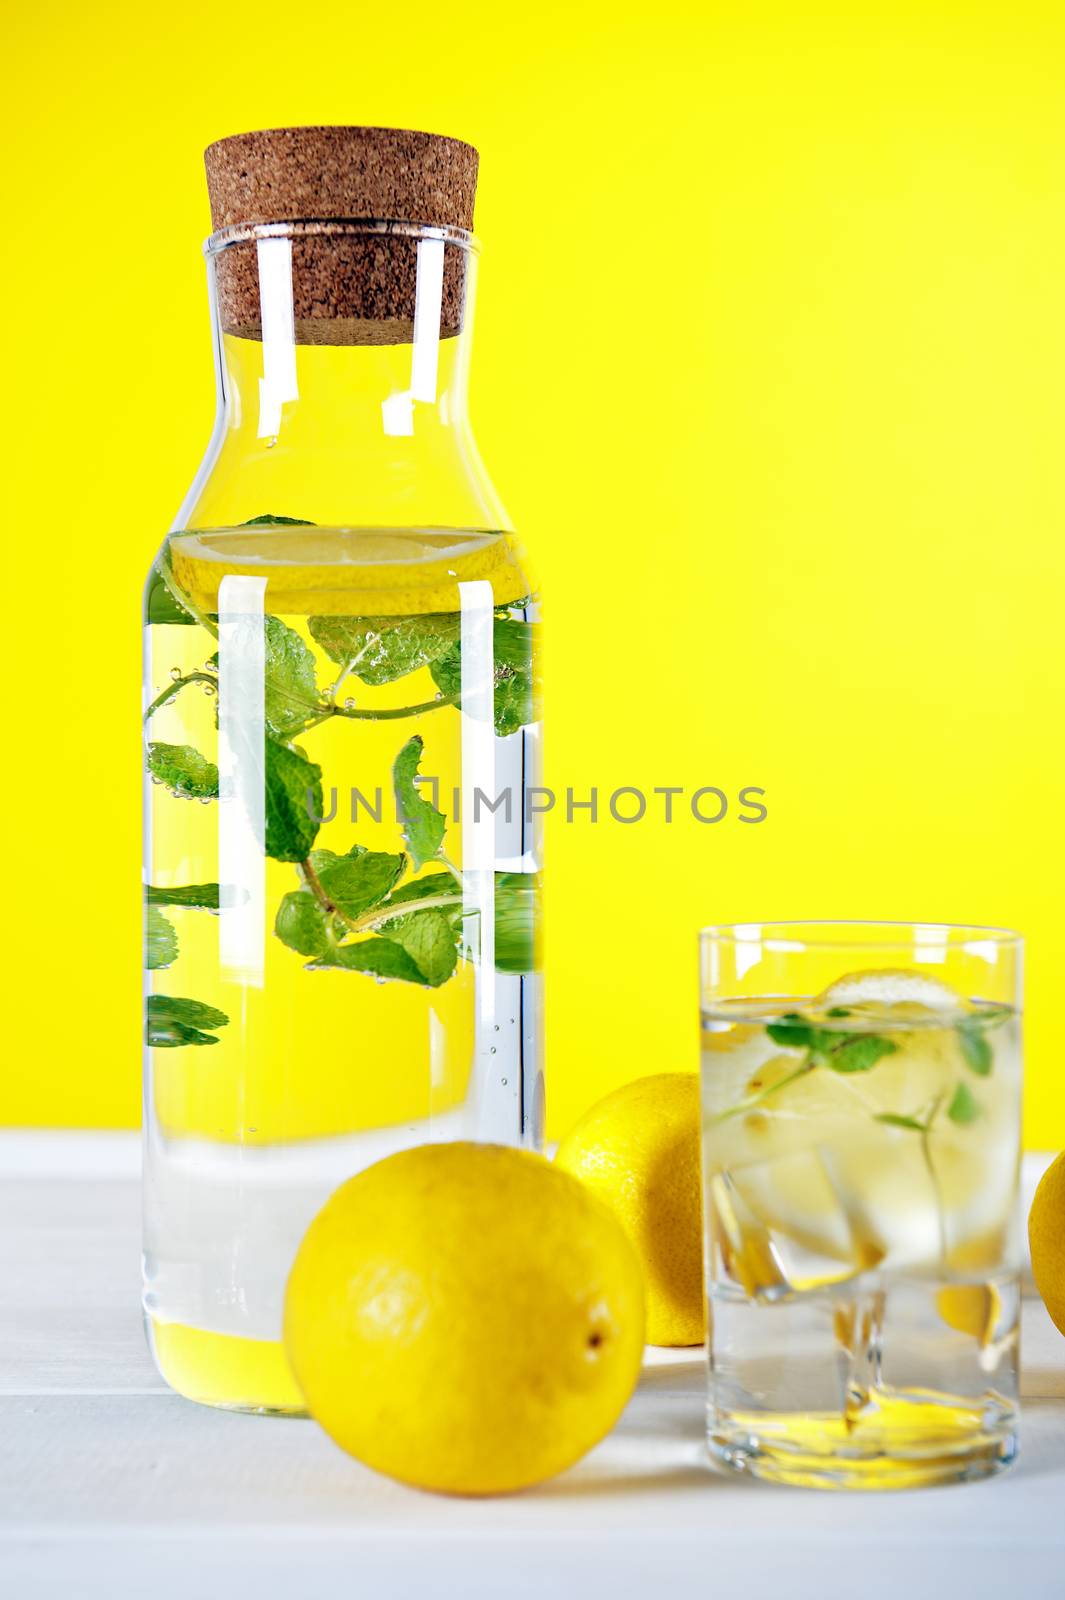 Cold water with lemon and mint on yellow background by Michalowski